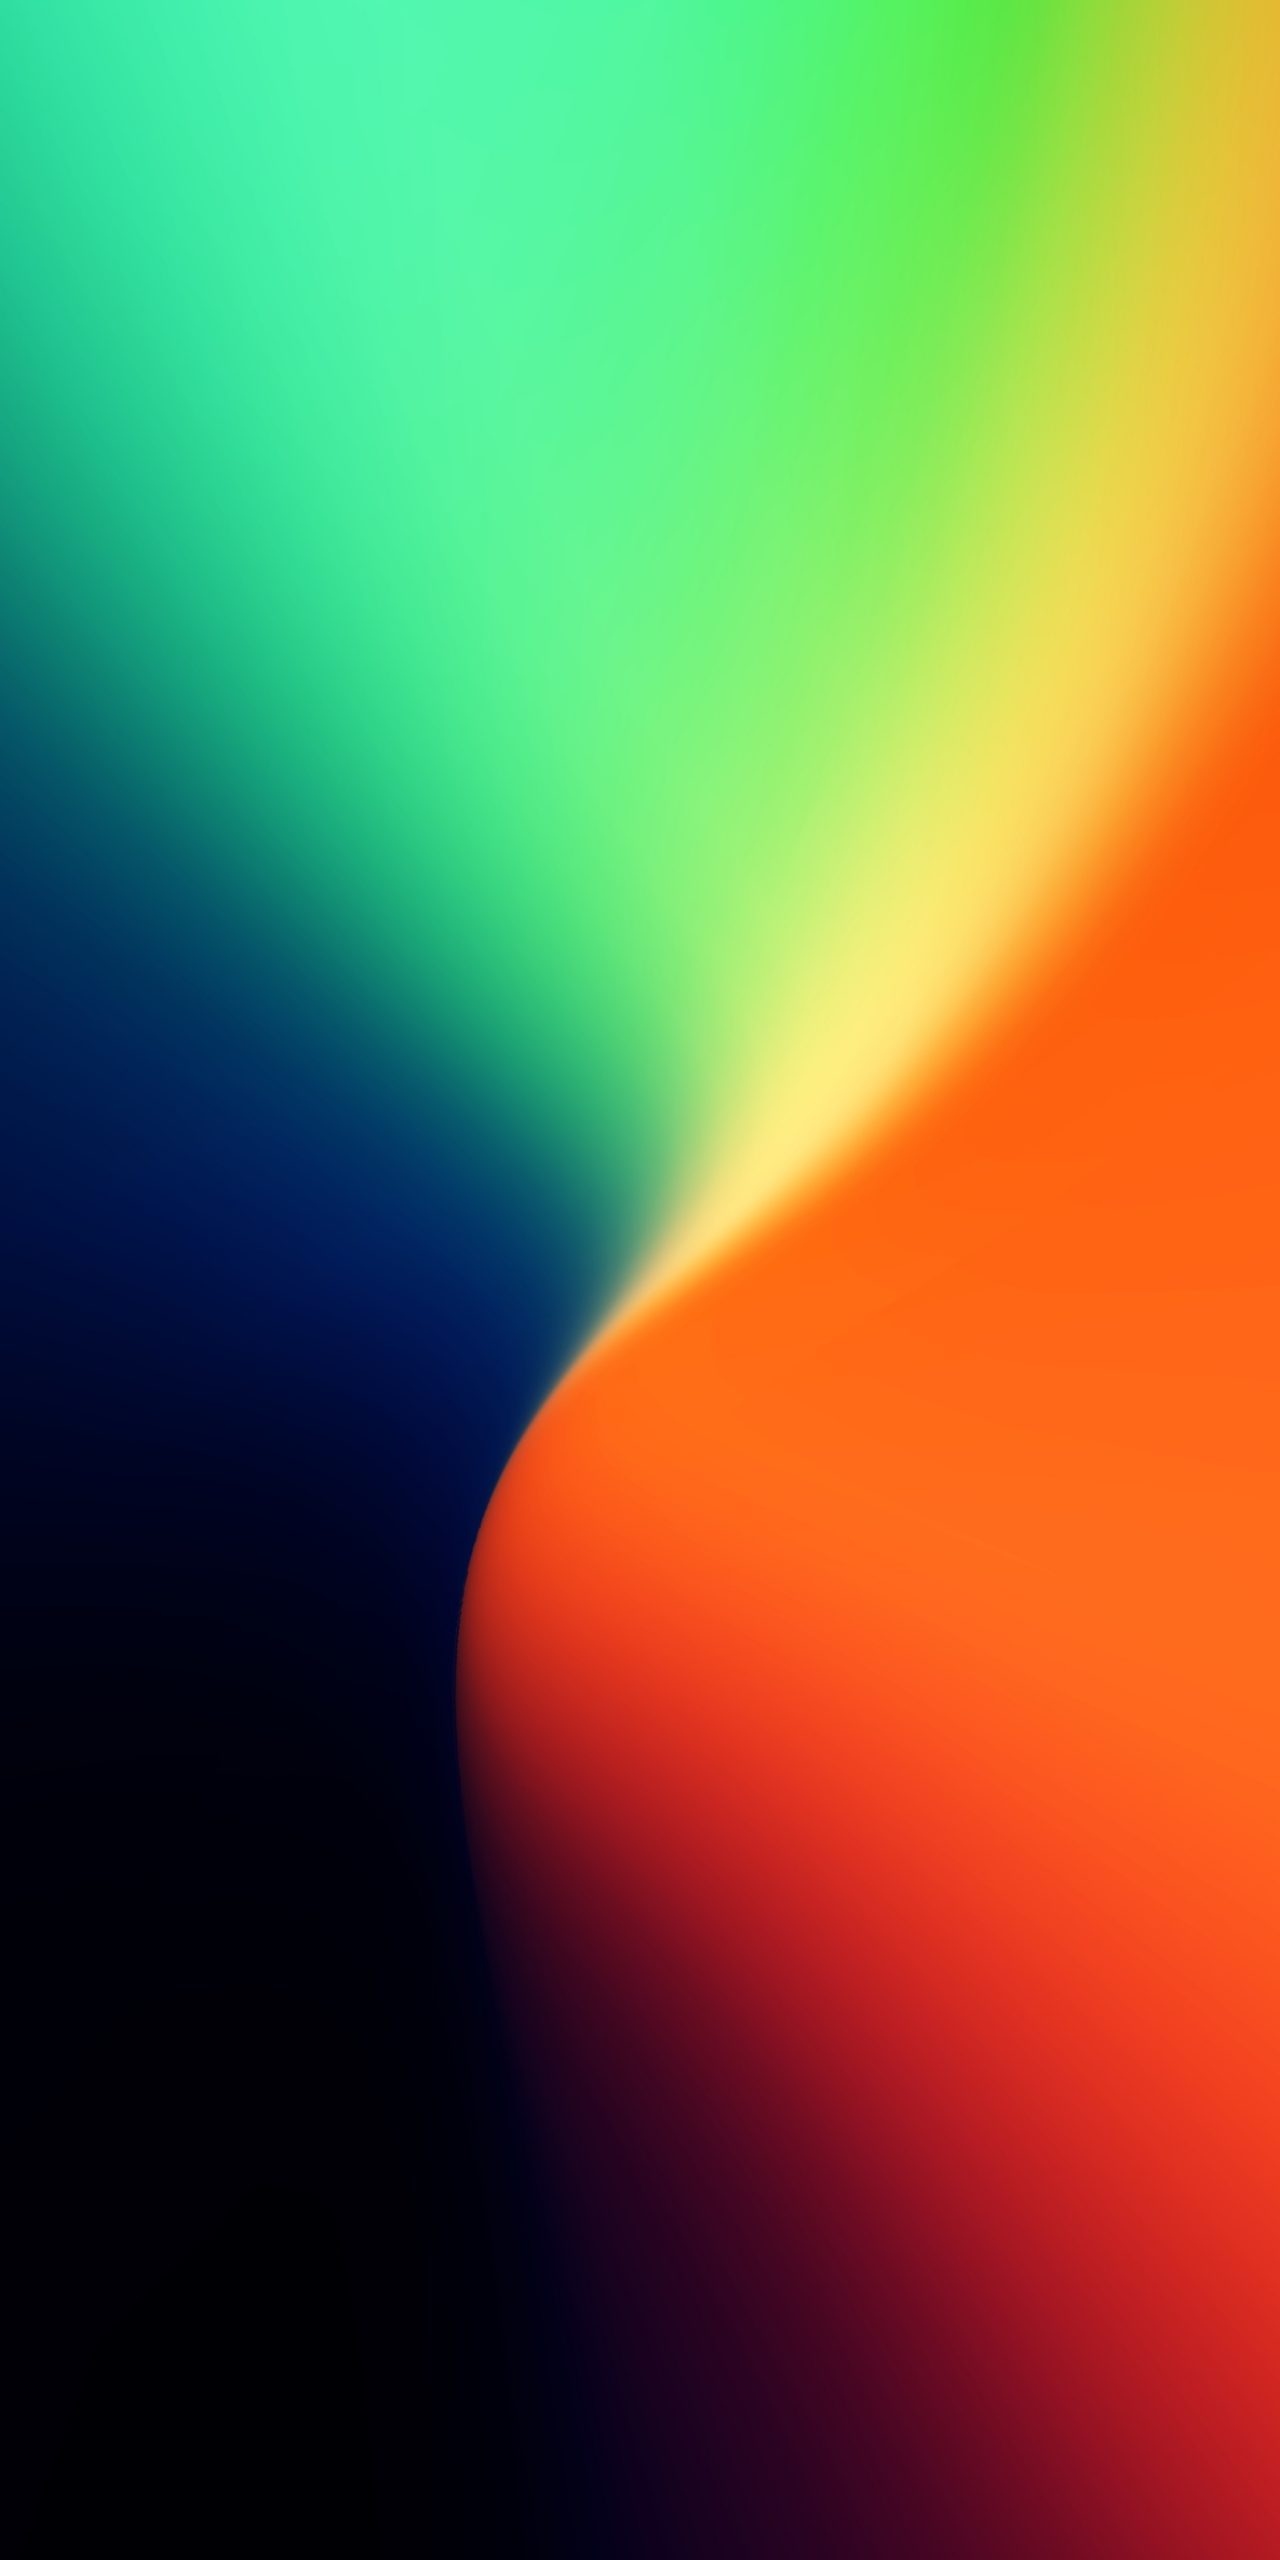 Gradient blue, orange, green and yellow by @Ongliong11 | Zollotech